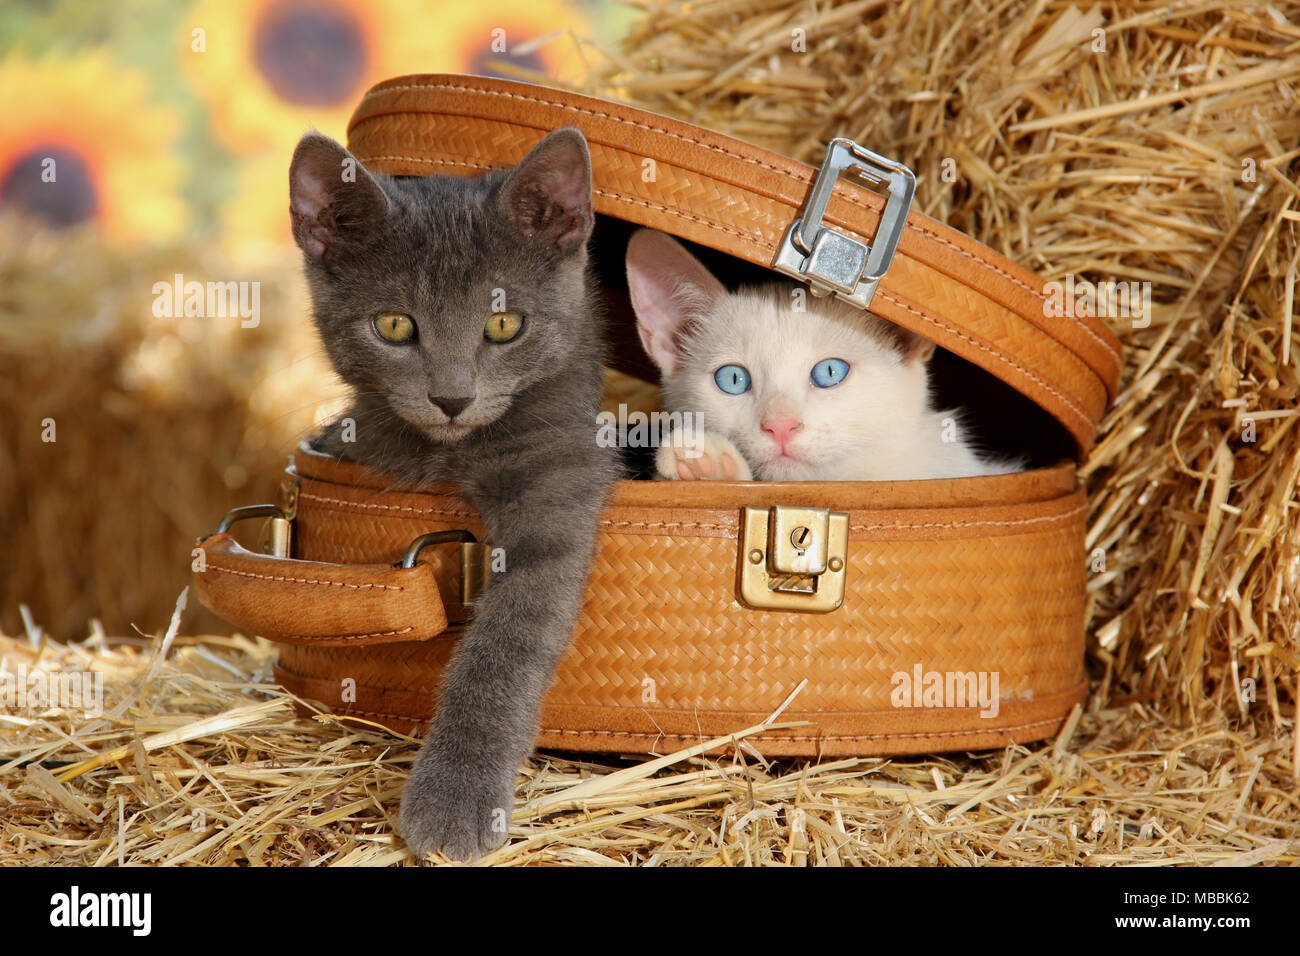 two cute kittens, blue and white, sitting in a basket Stock Photo